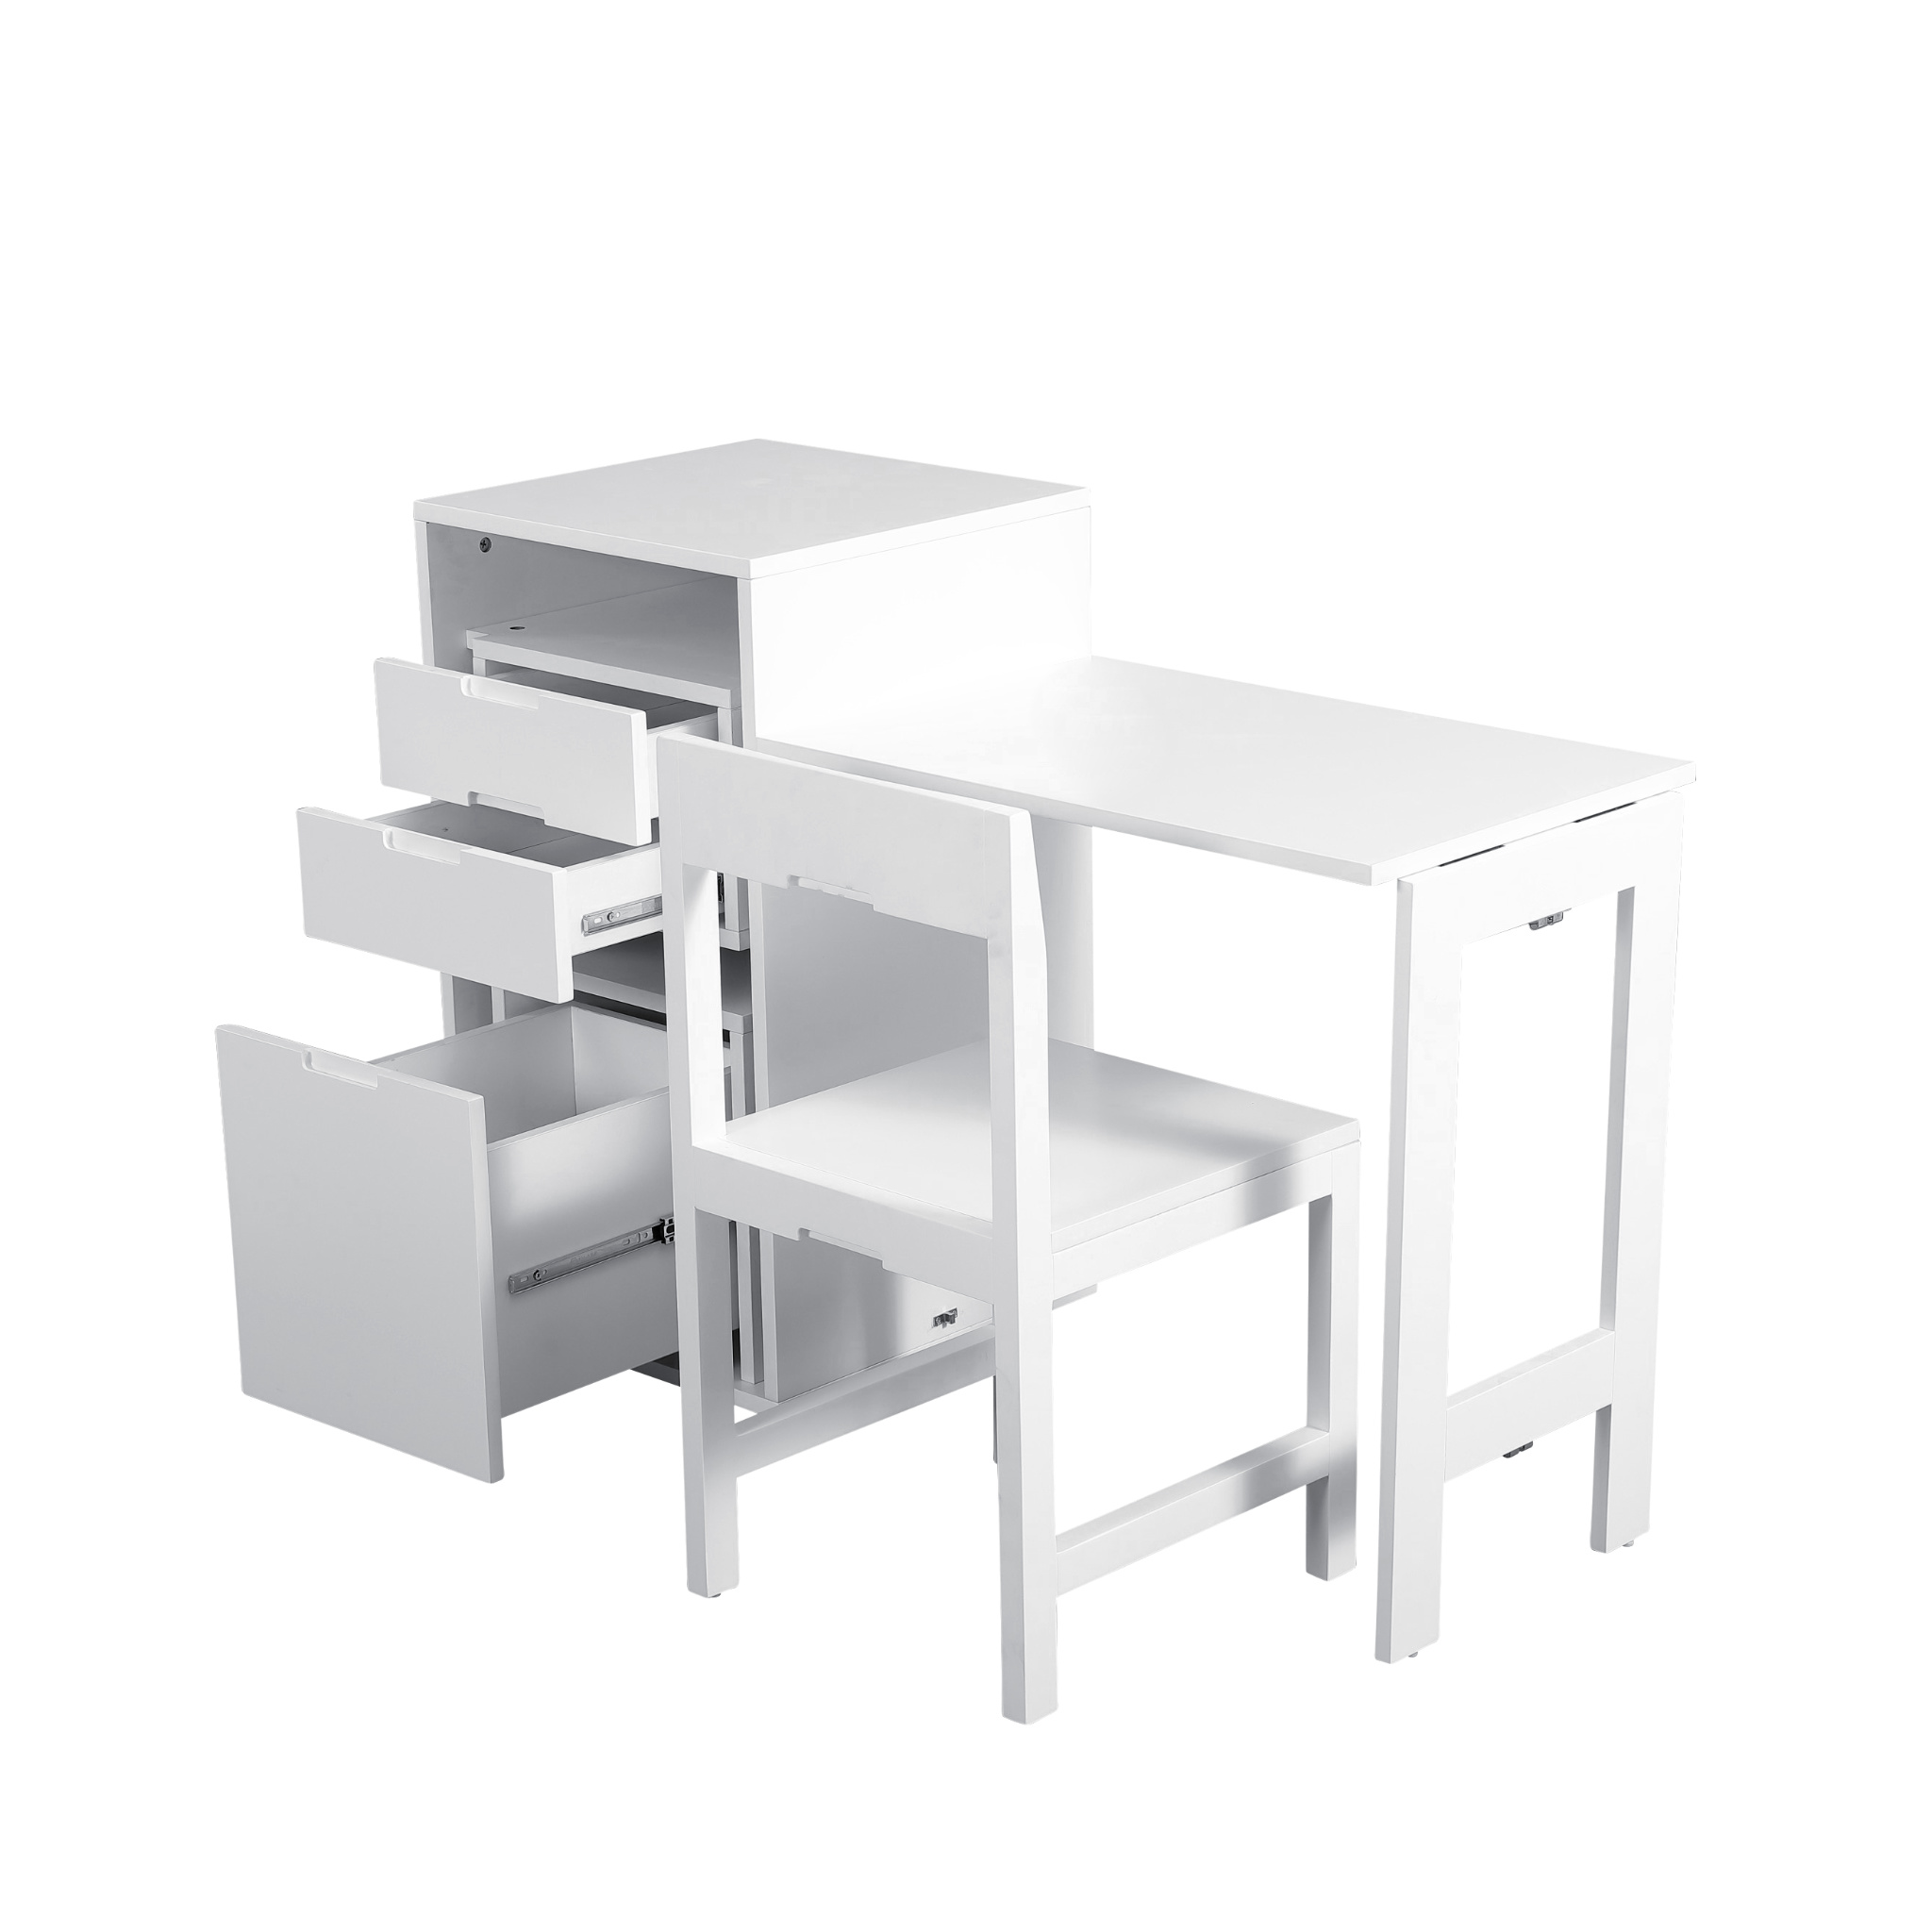 https://expandfurniture.com/wp-content/uploads/2015/06/Ludovico-micro-office-open-with-hidden-chair-and-table-in-office-cabinet-White-matte.jpg